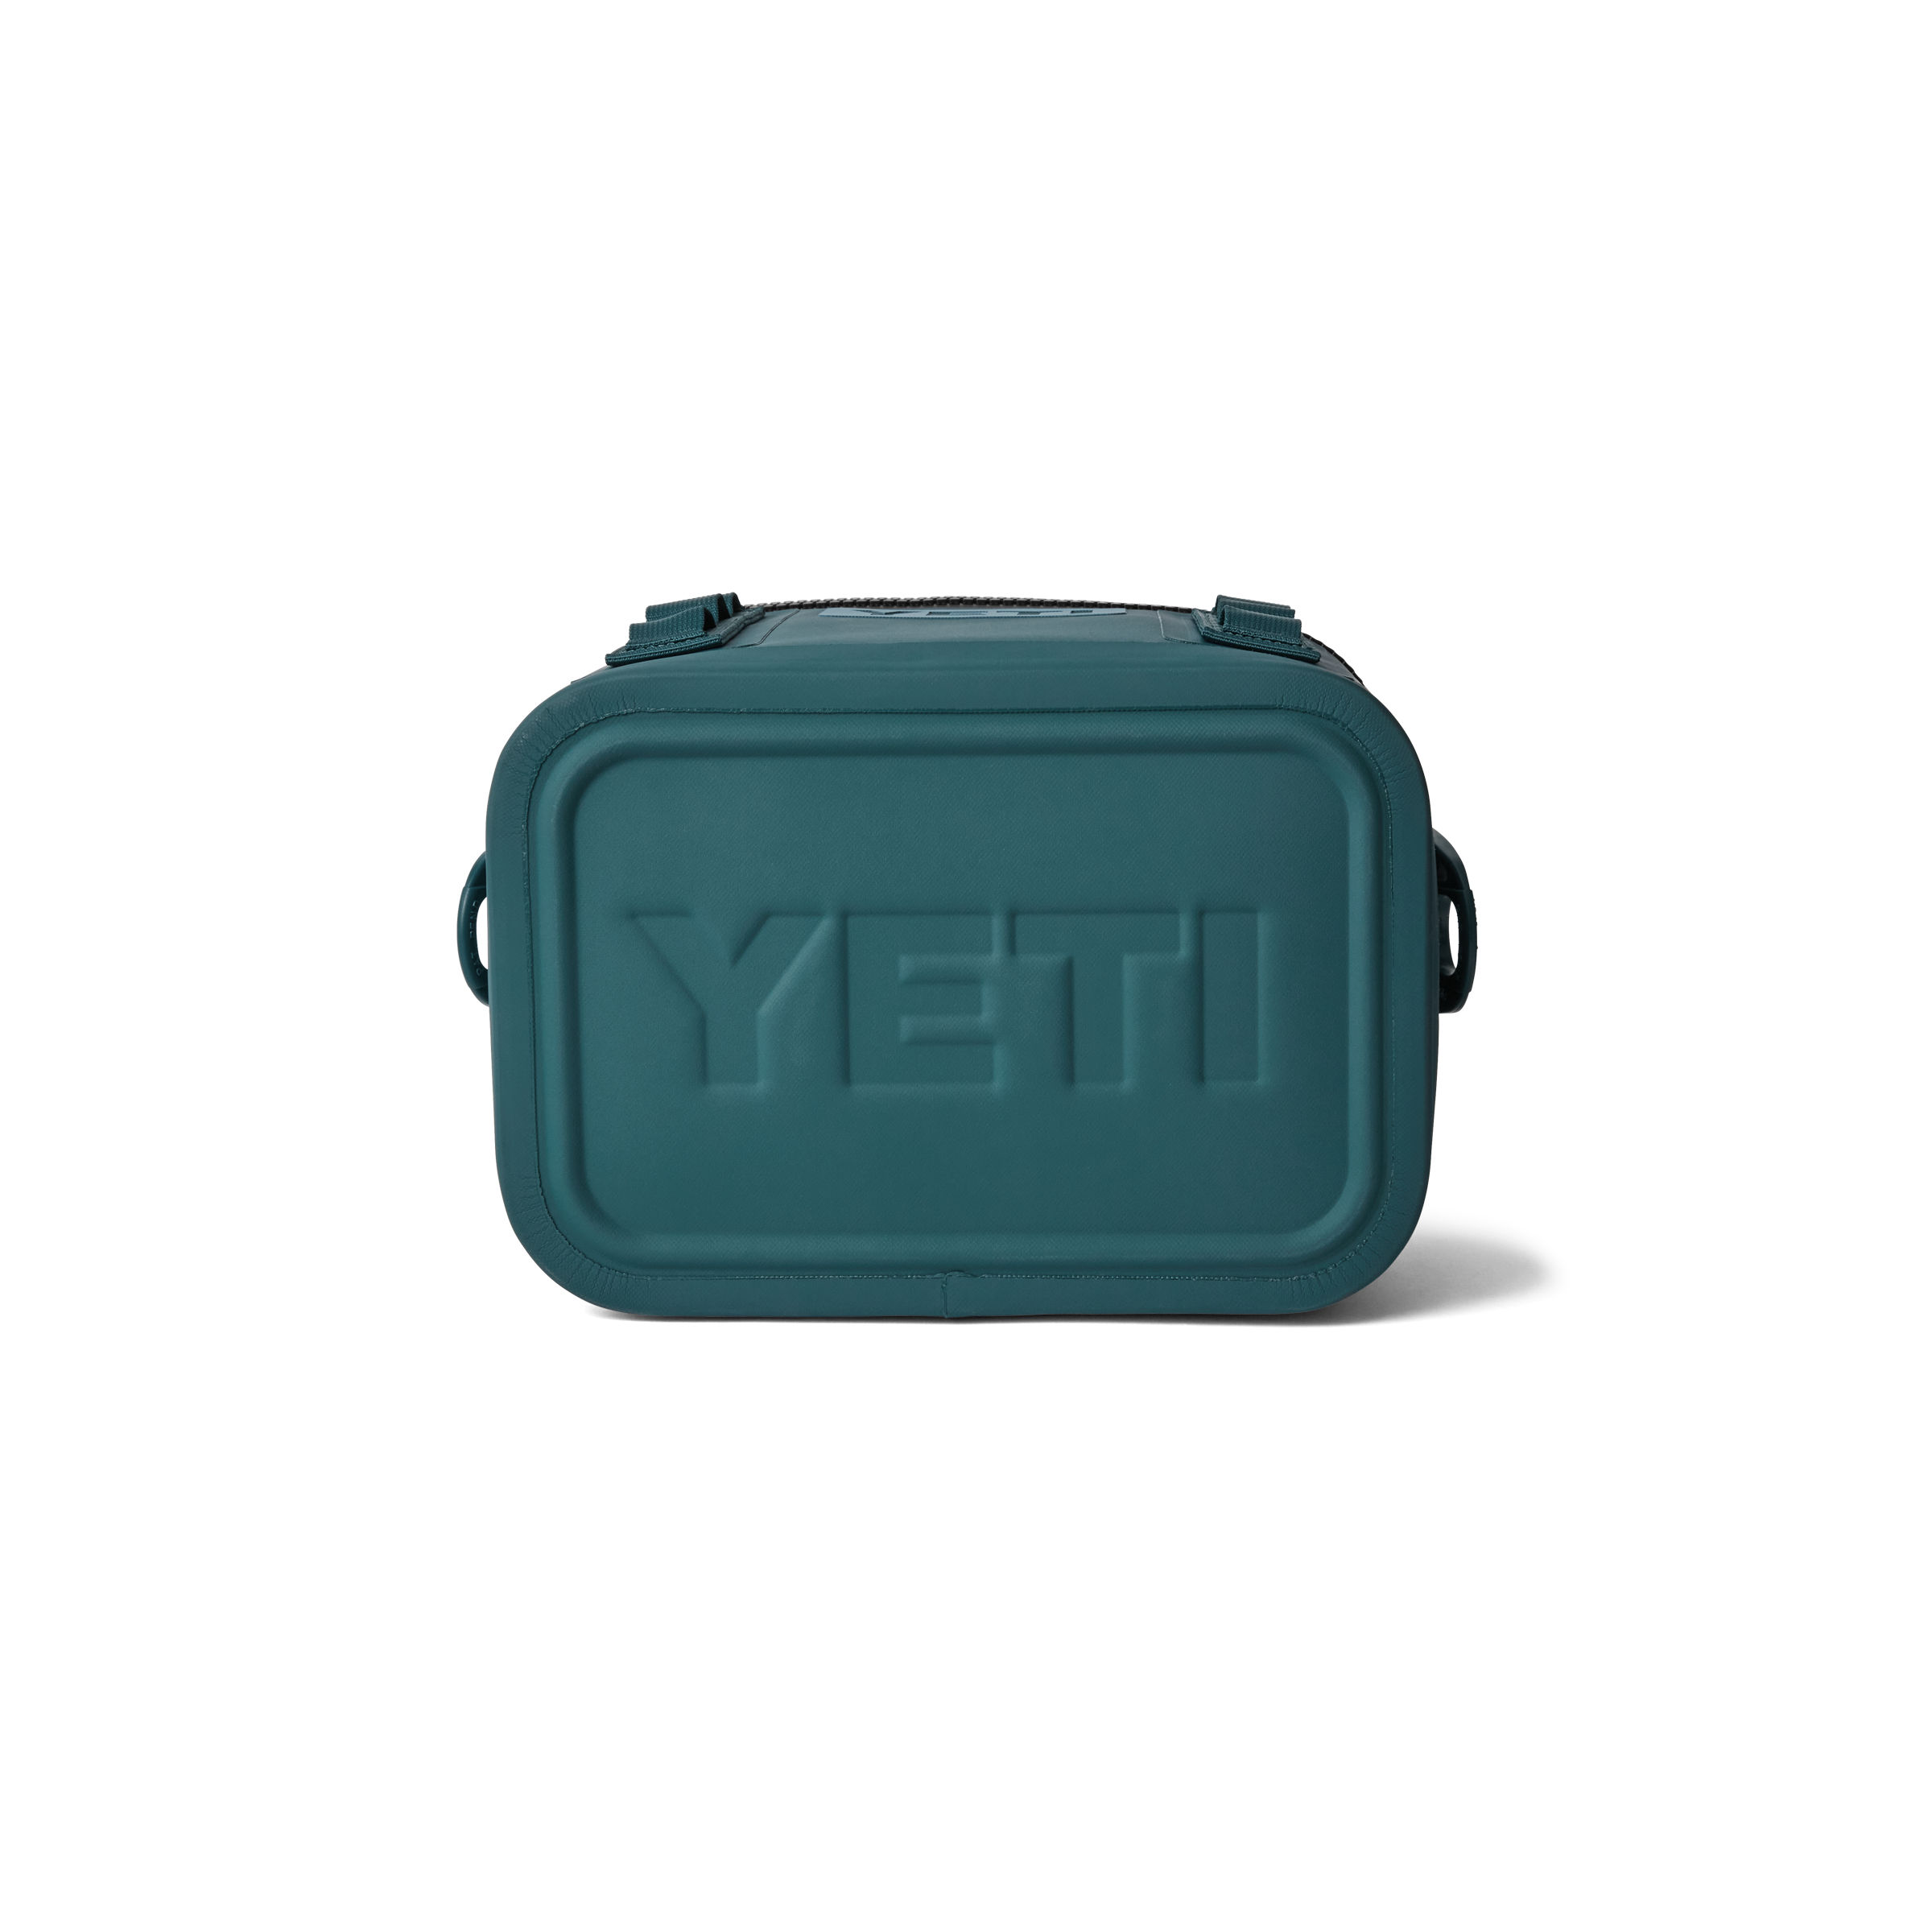 hydrolok zipper, 100% leak proof, coldcell insulation, dryhide shell, keep cans cold, yeti